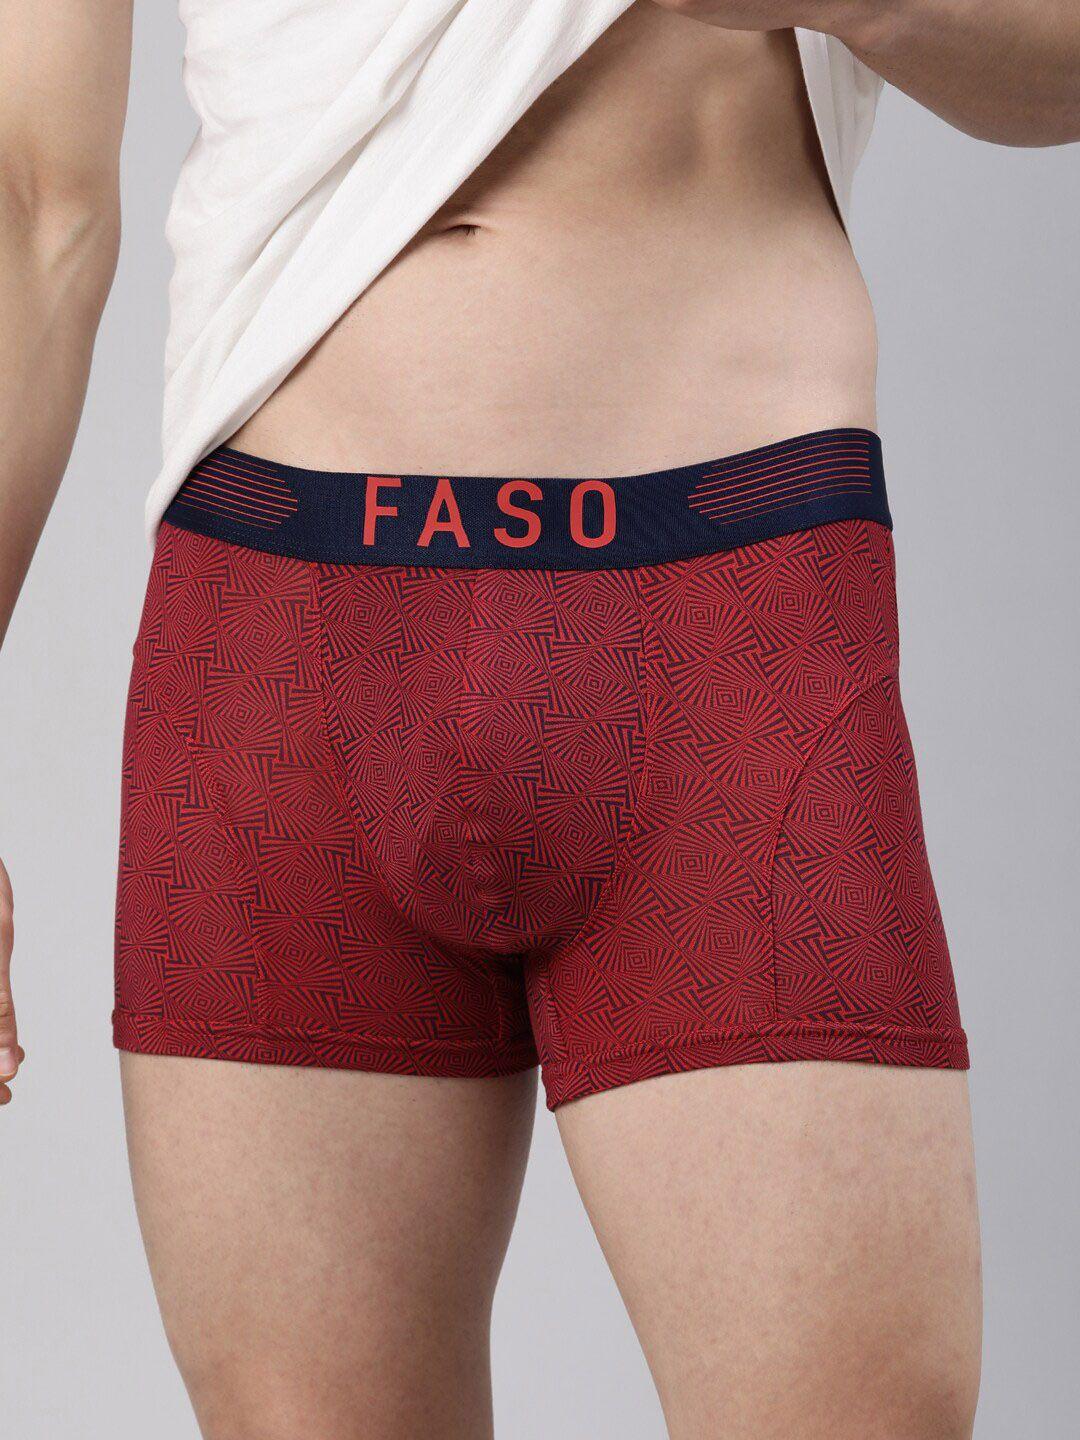 faso printed modal trunk ft7002-sq-chinesered